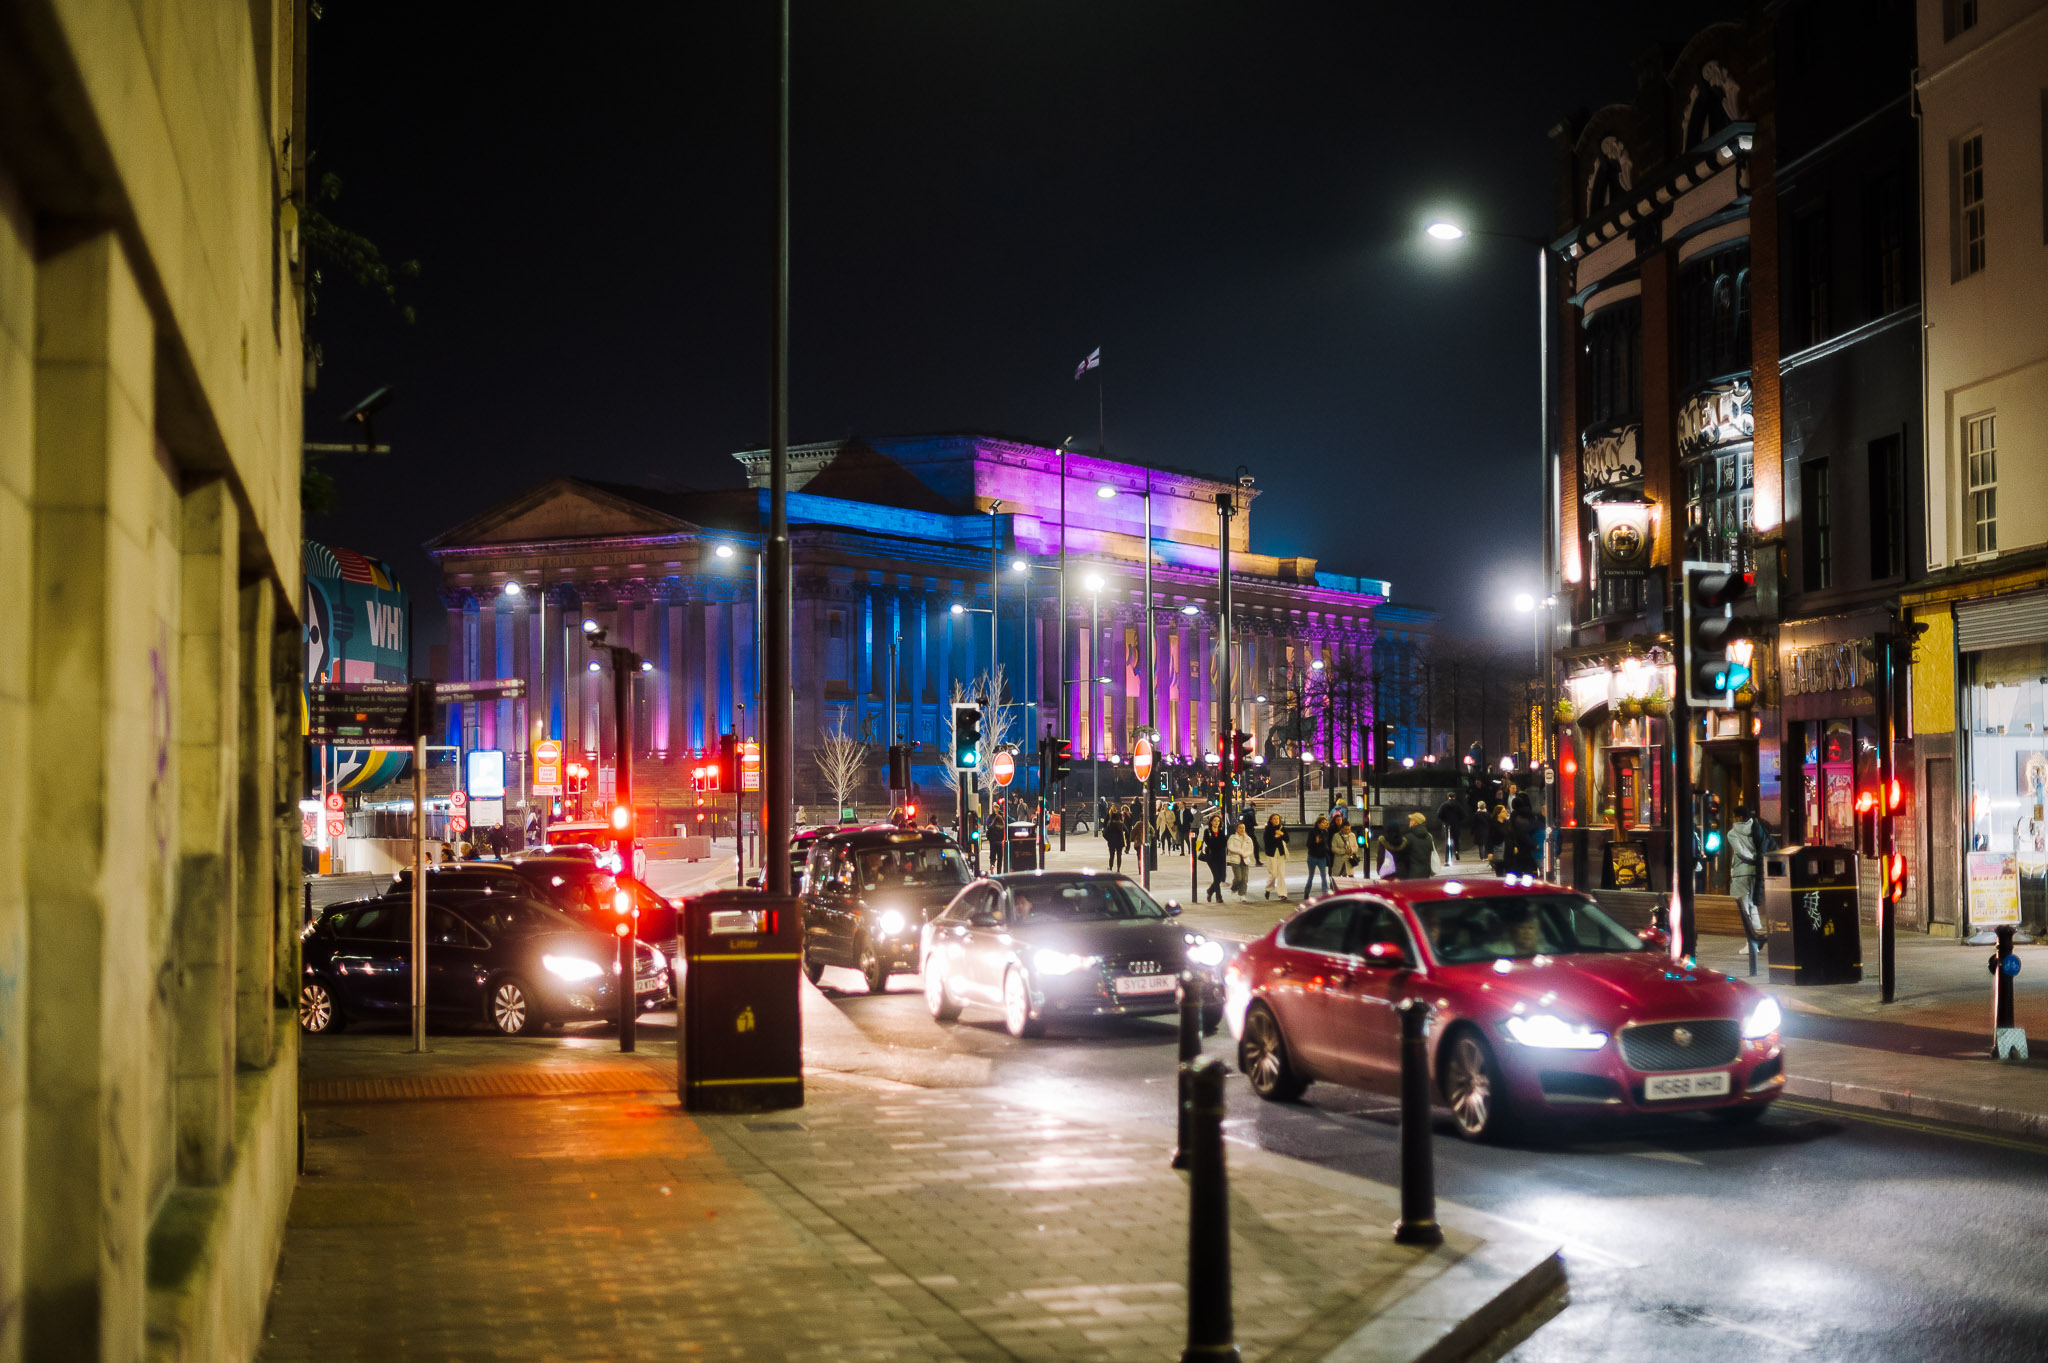 Walking down a street with busy traffic on. In the distance is St George's Hall which is lit up in the trans flag colours.